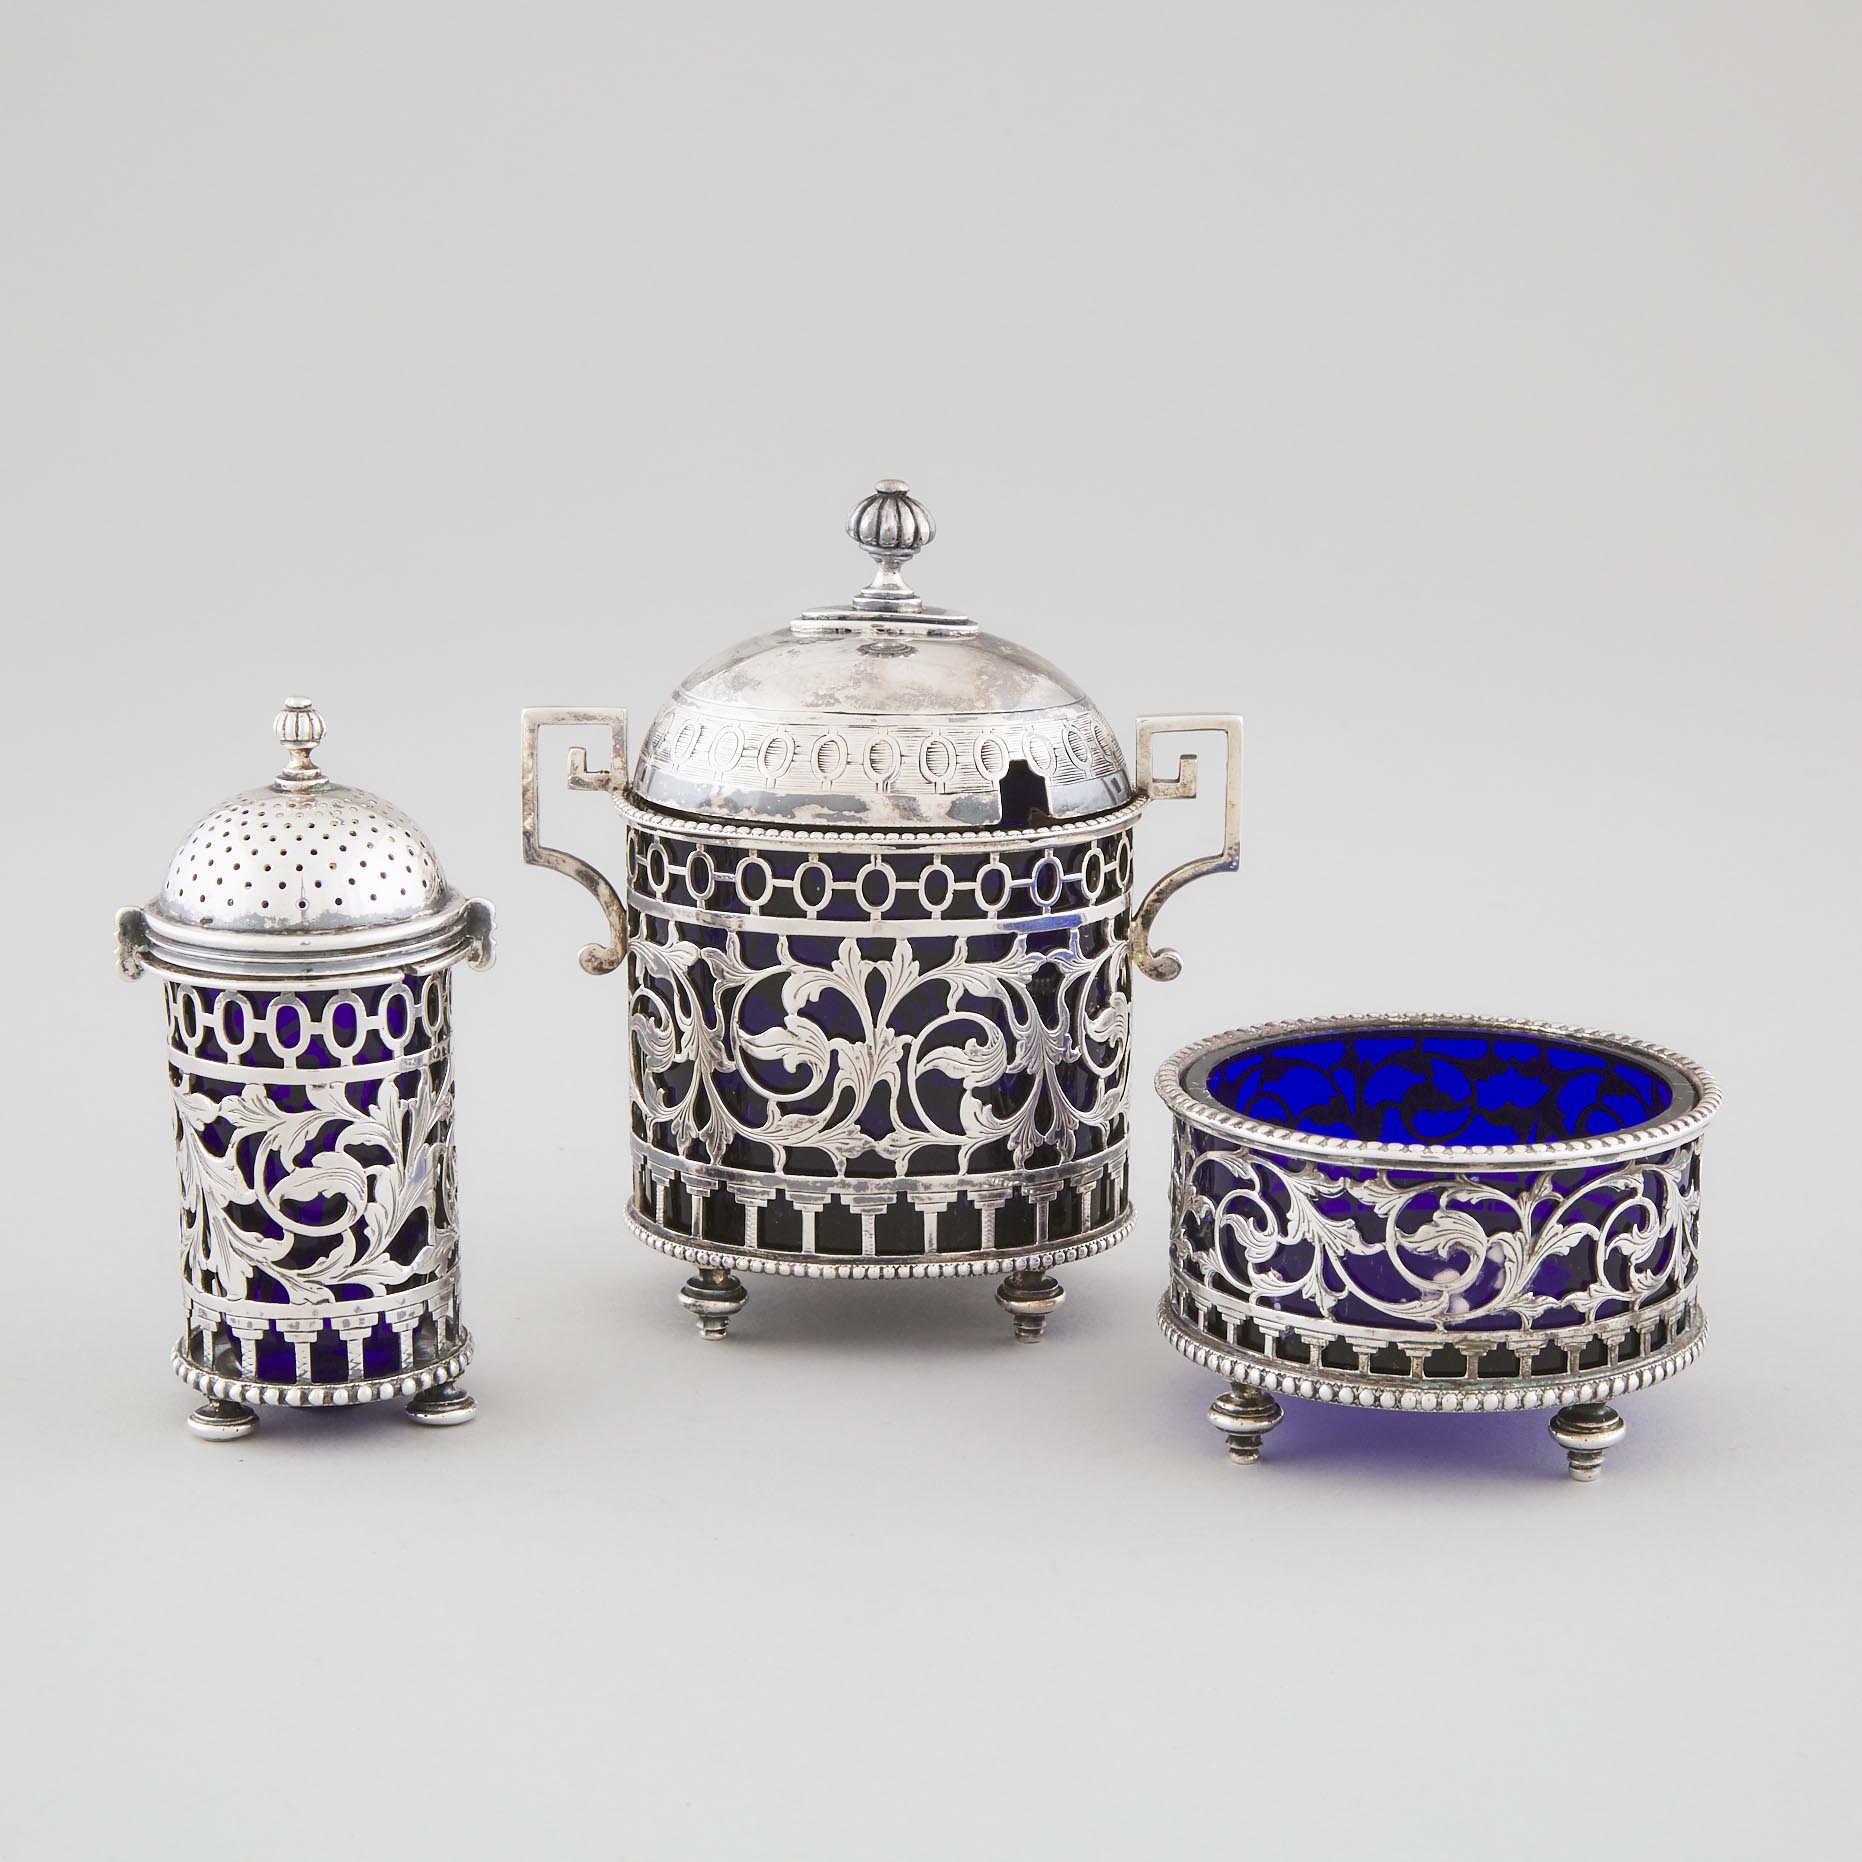 Dutch Silver Pierced and Engraved Condiment Set, 19th century